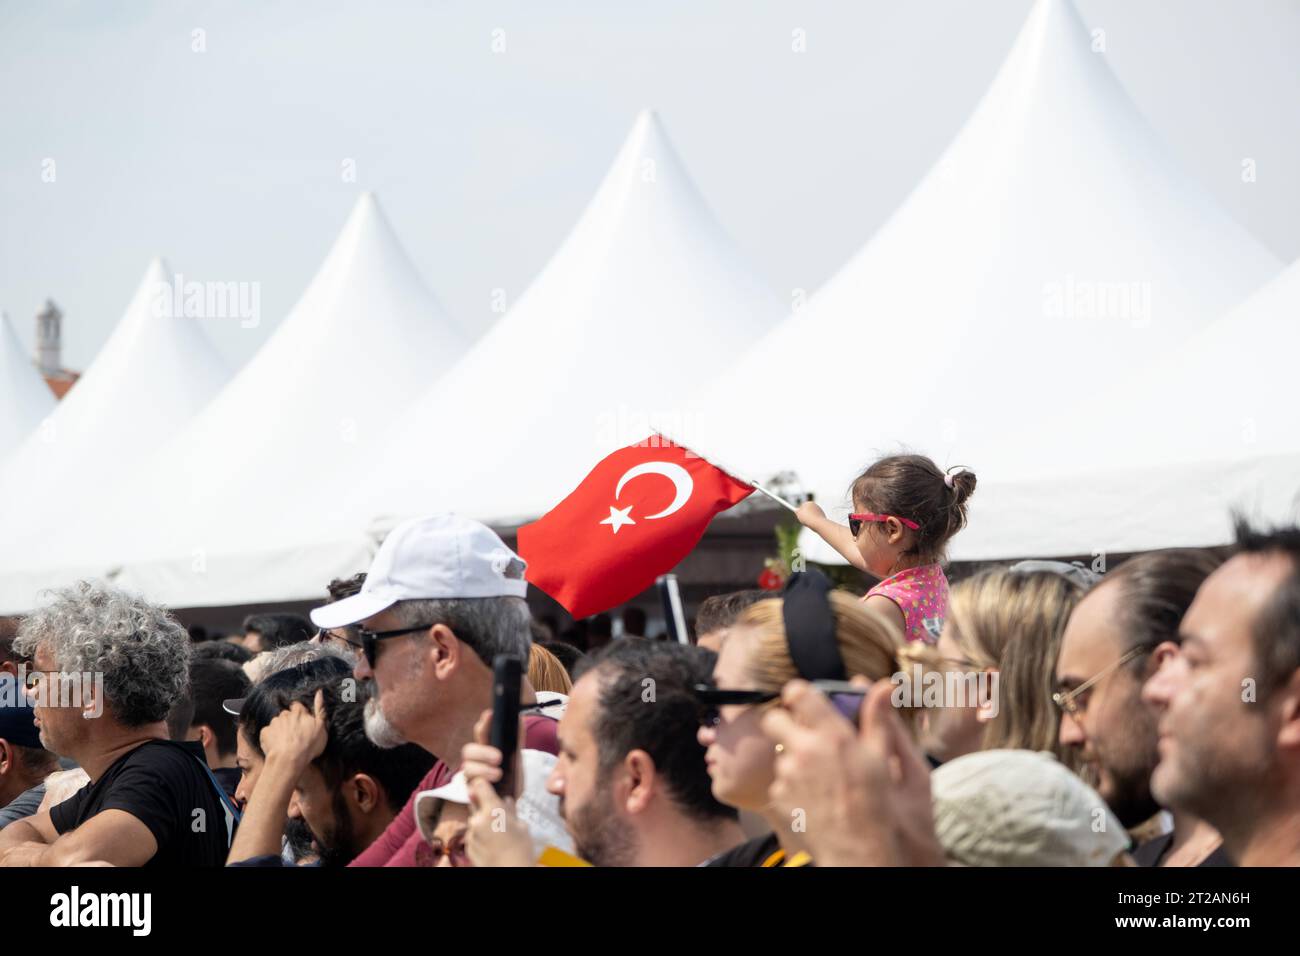 Izmir, Turkey, September 9, 2023: A heartwarming moment capturing an 8-9-year-old girl with sunglasses, perched on her father's shoulders, waving the Stock Photo